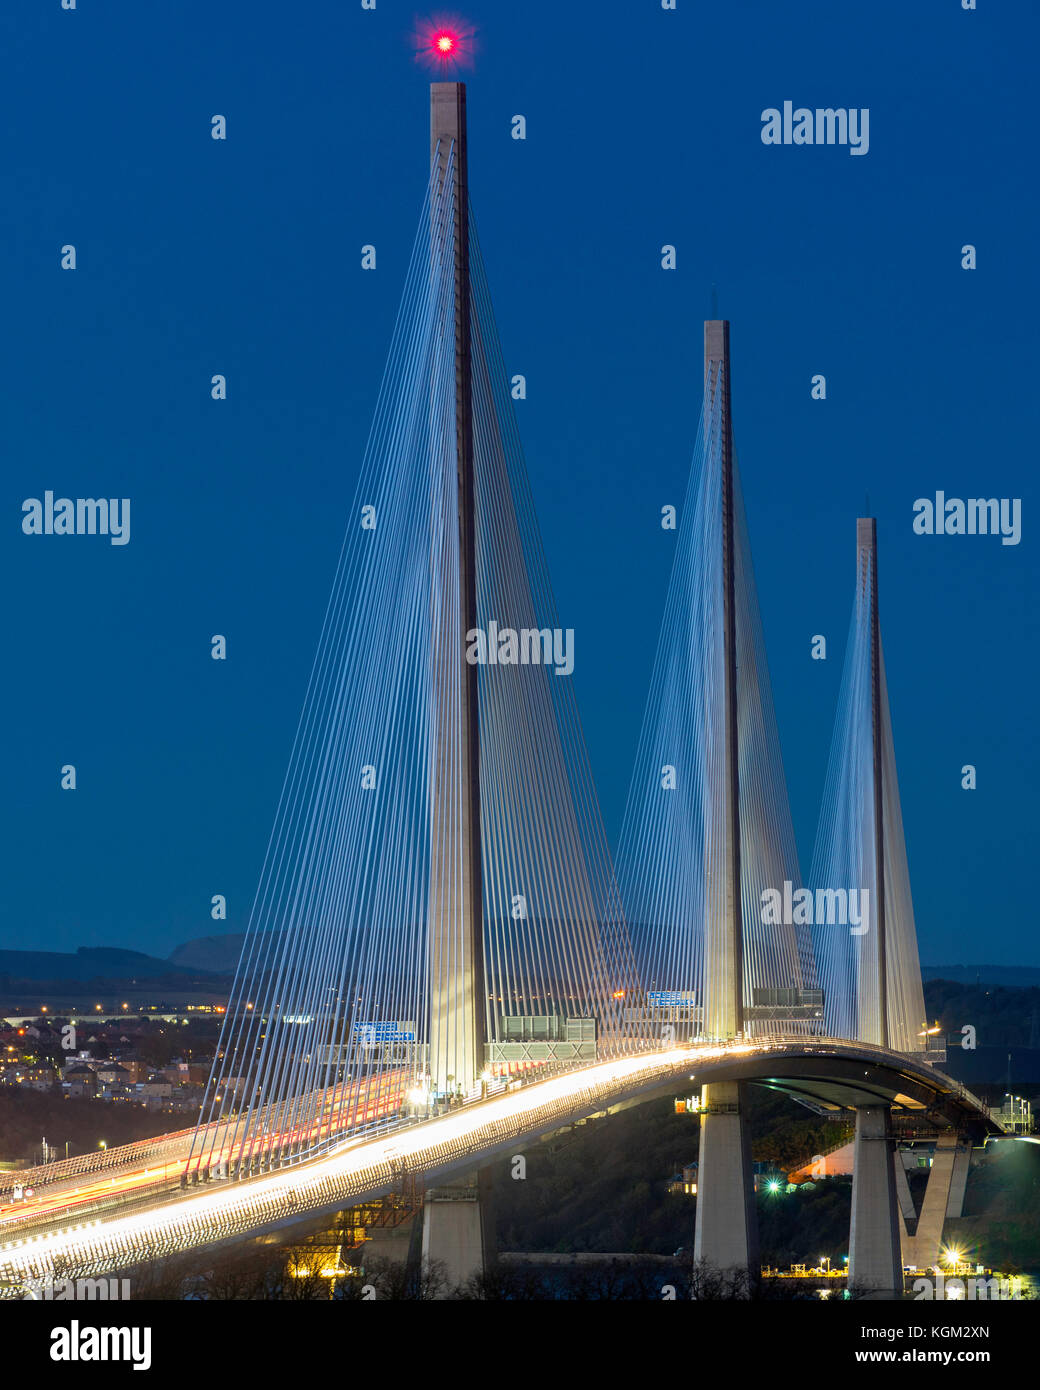 View of new Queensferry Crossing bridge at night spanning the Firth of Forth between West Lothian and Fife in Scotland, United Kingdom. Stock Photo